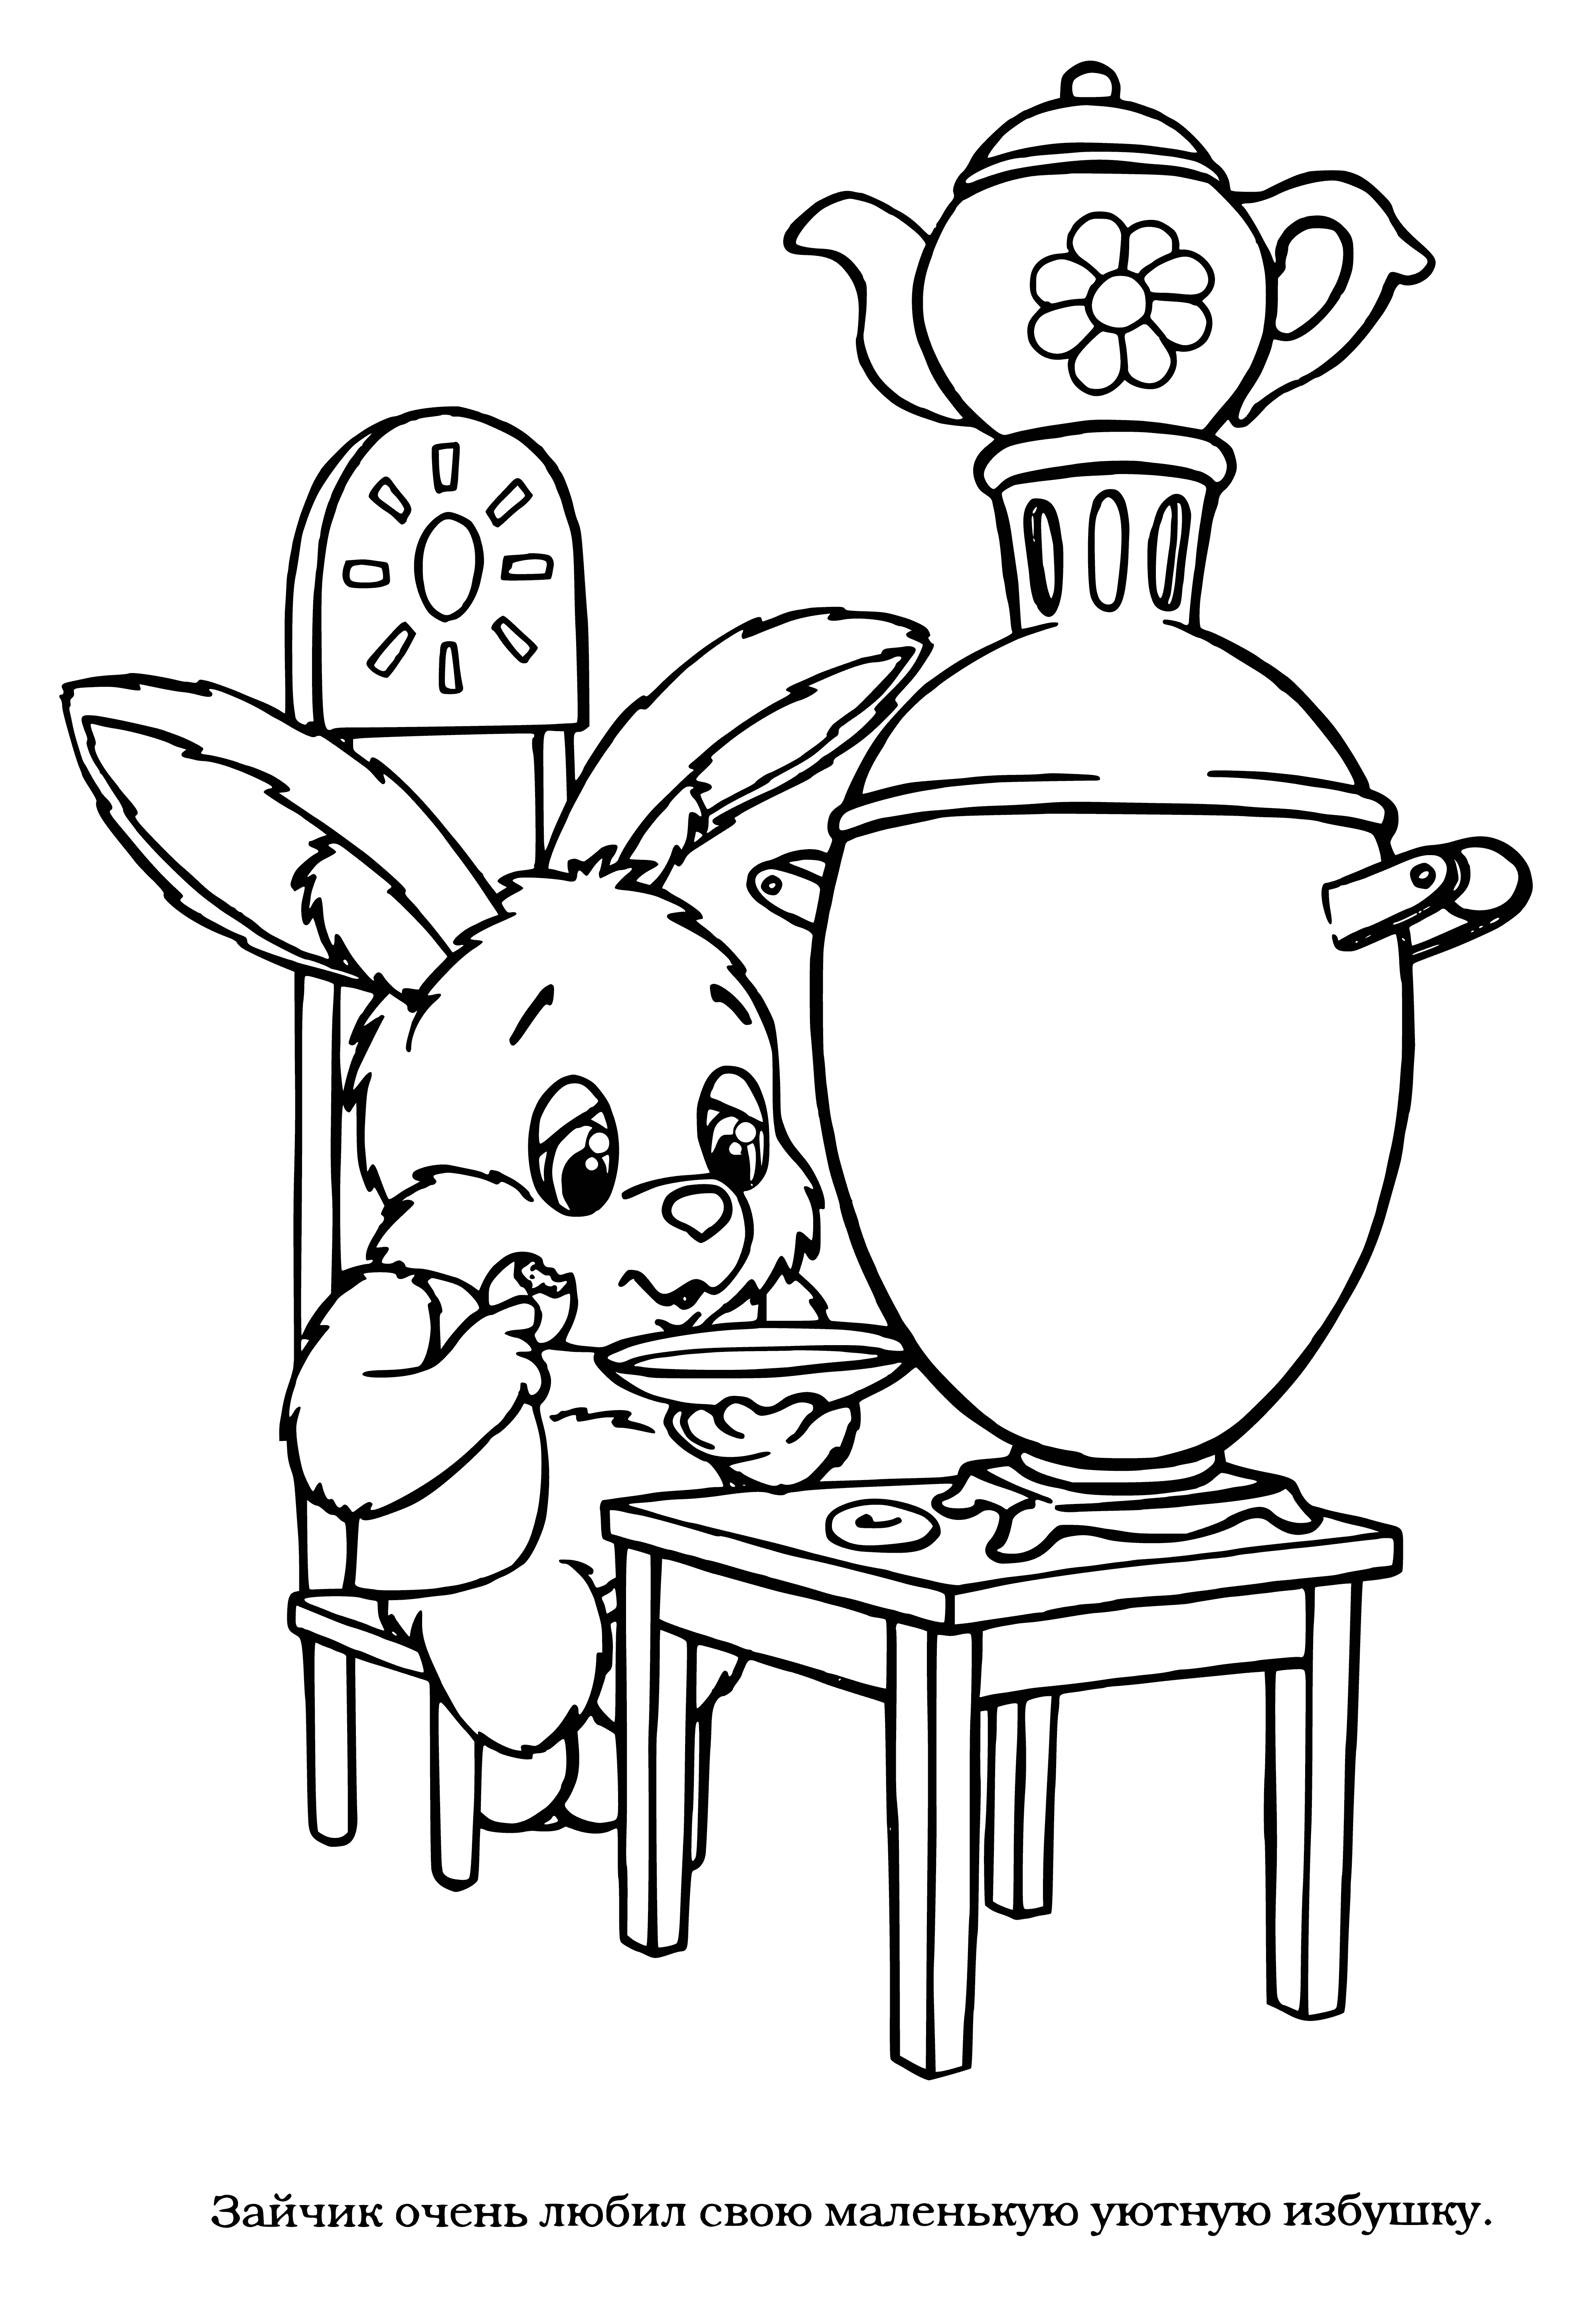 Bunny at the samovar coloring page